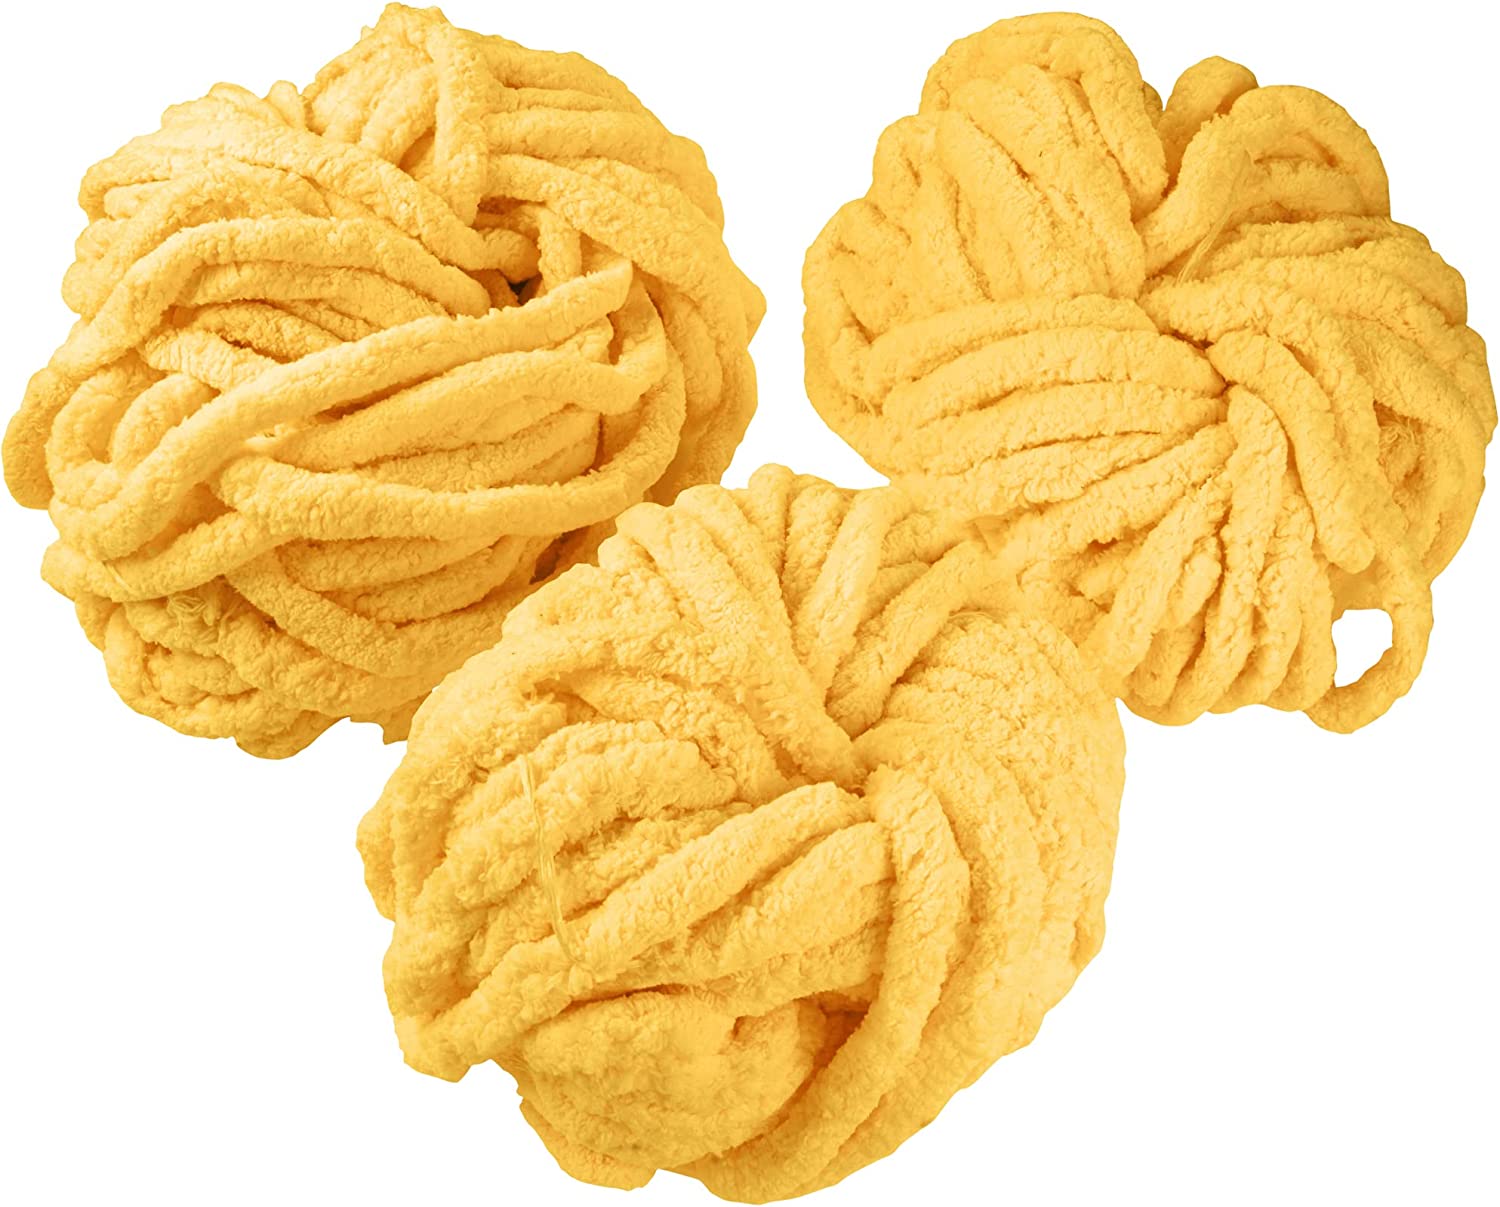 Idiy Chunky Yarn 3 Pack (24 Yards Each Skein) Bright Yellow Fluffy Chenille Yarn Perfect for Soft Throw and Baby Blankets, A